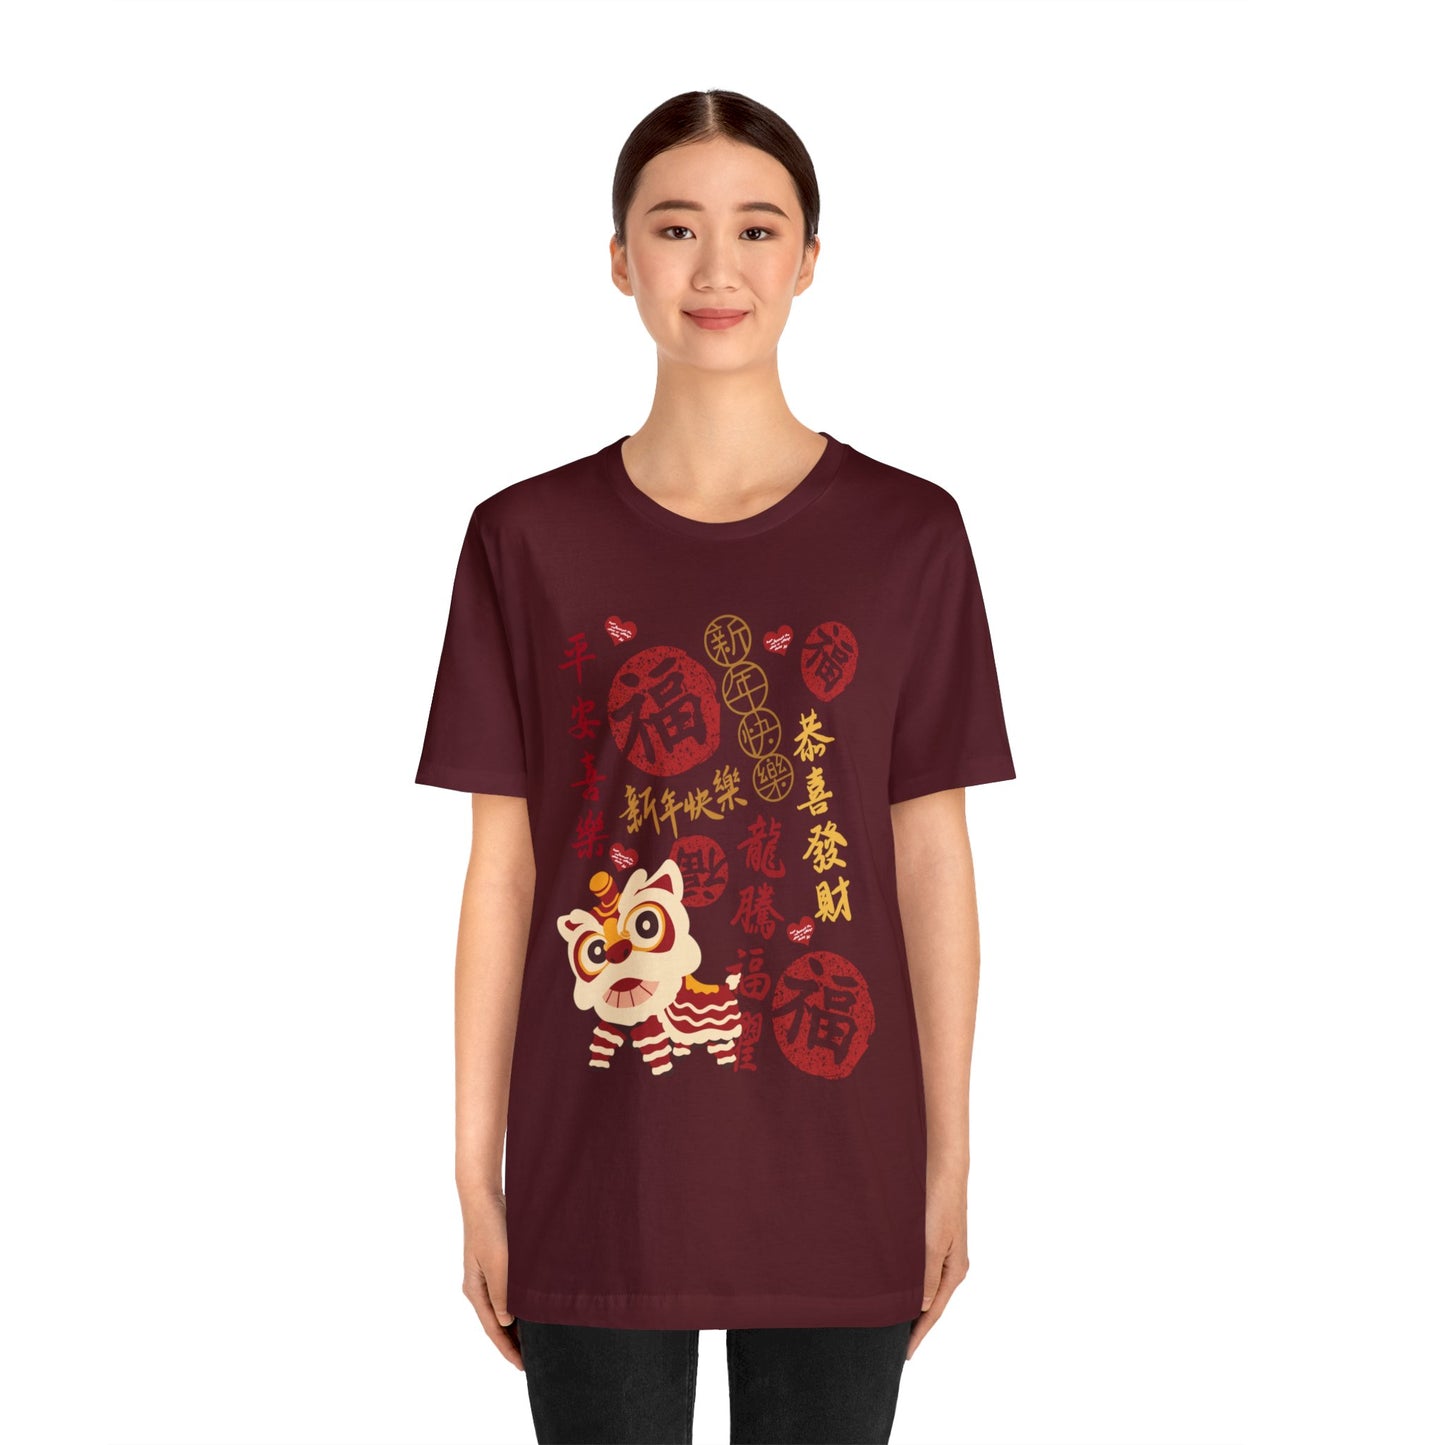 Unisex Happy Chinese New Year Good Luck Wishes T-shirts